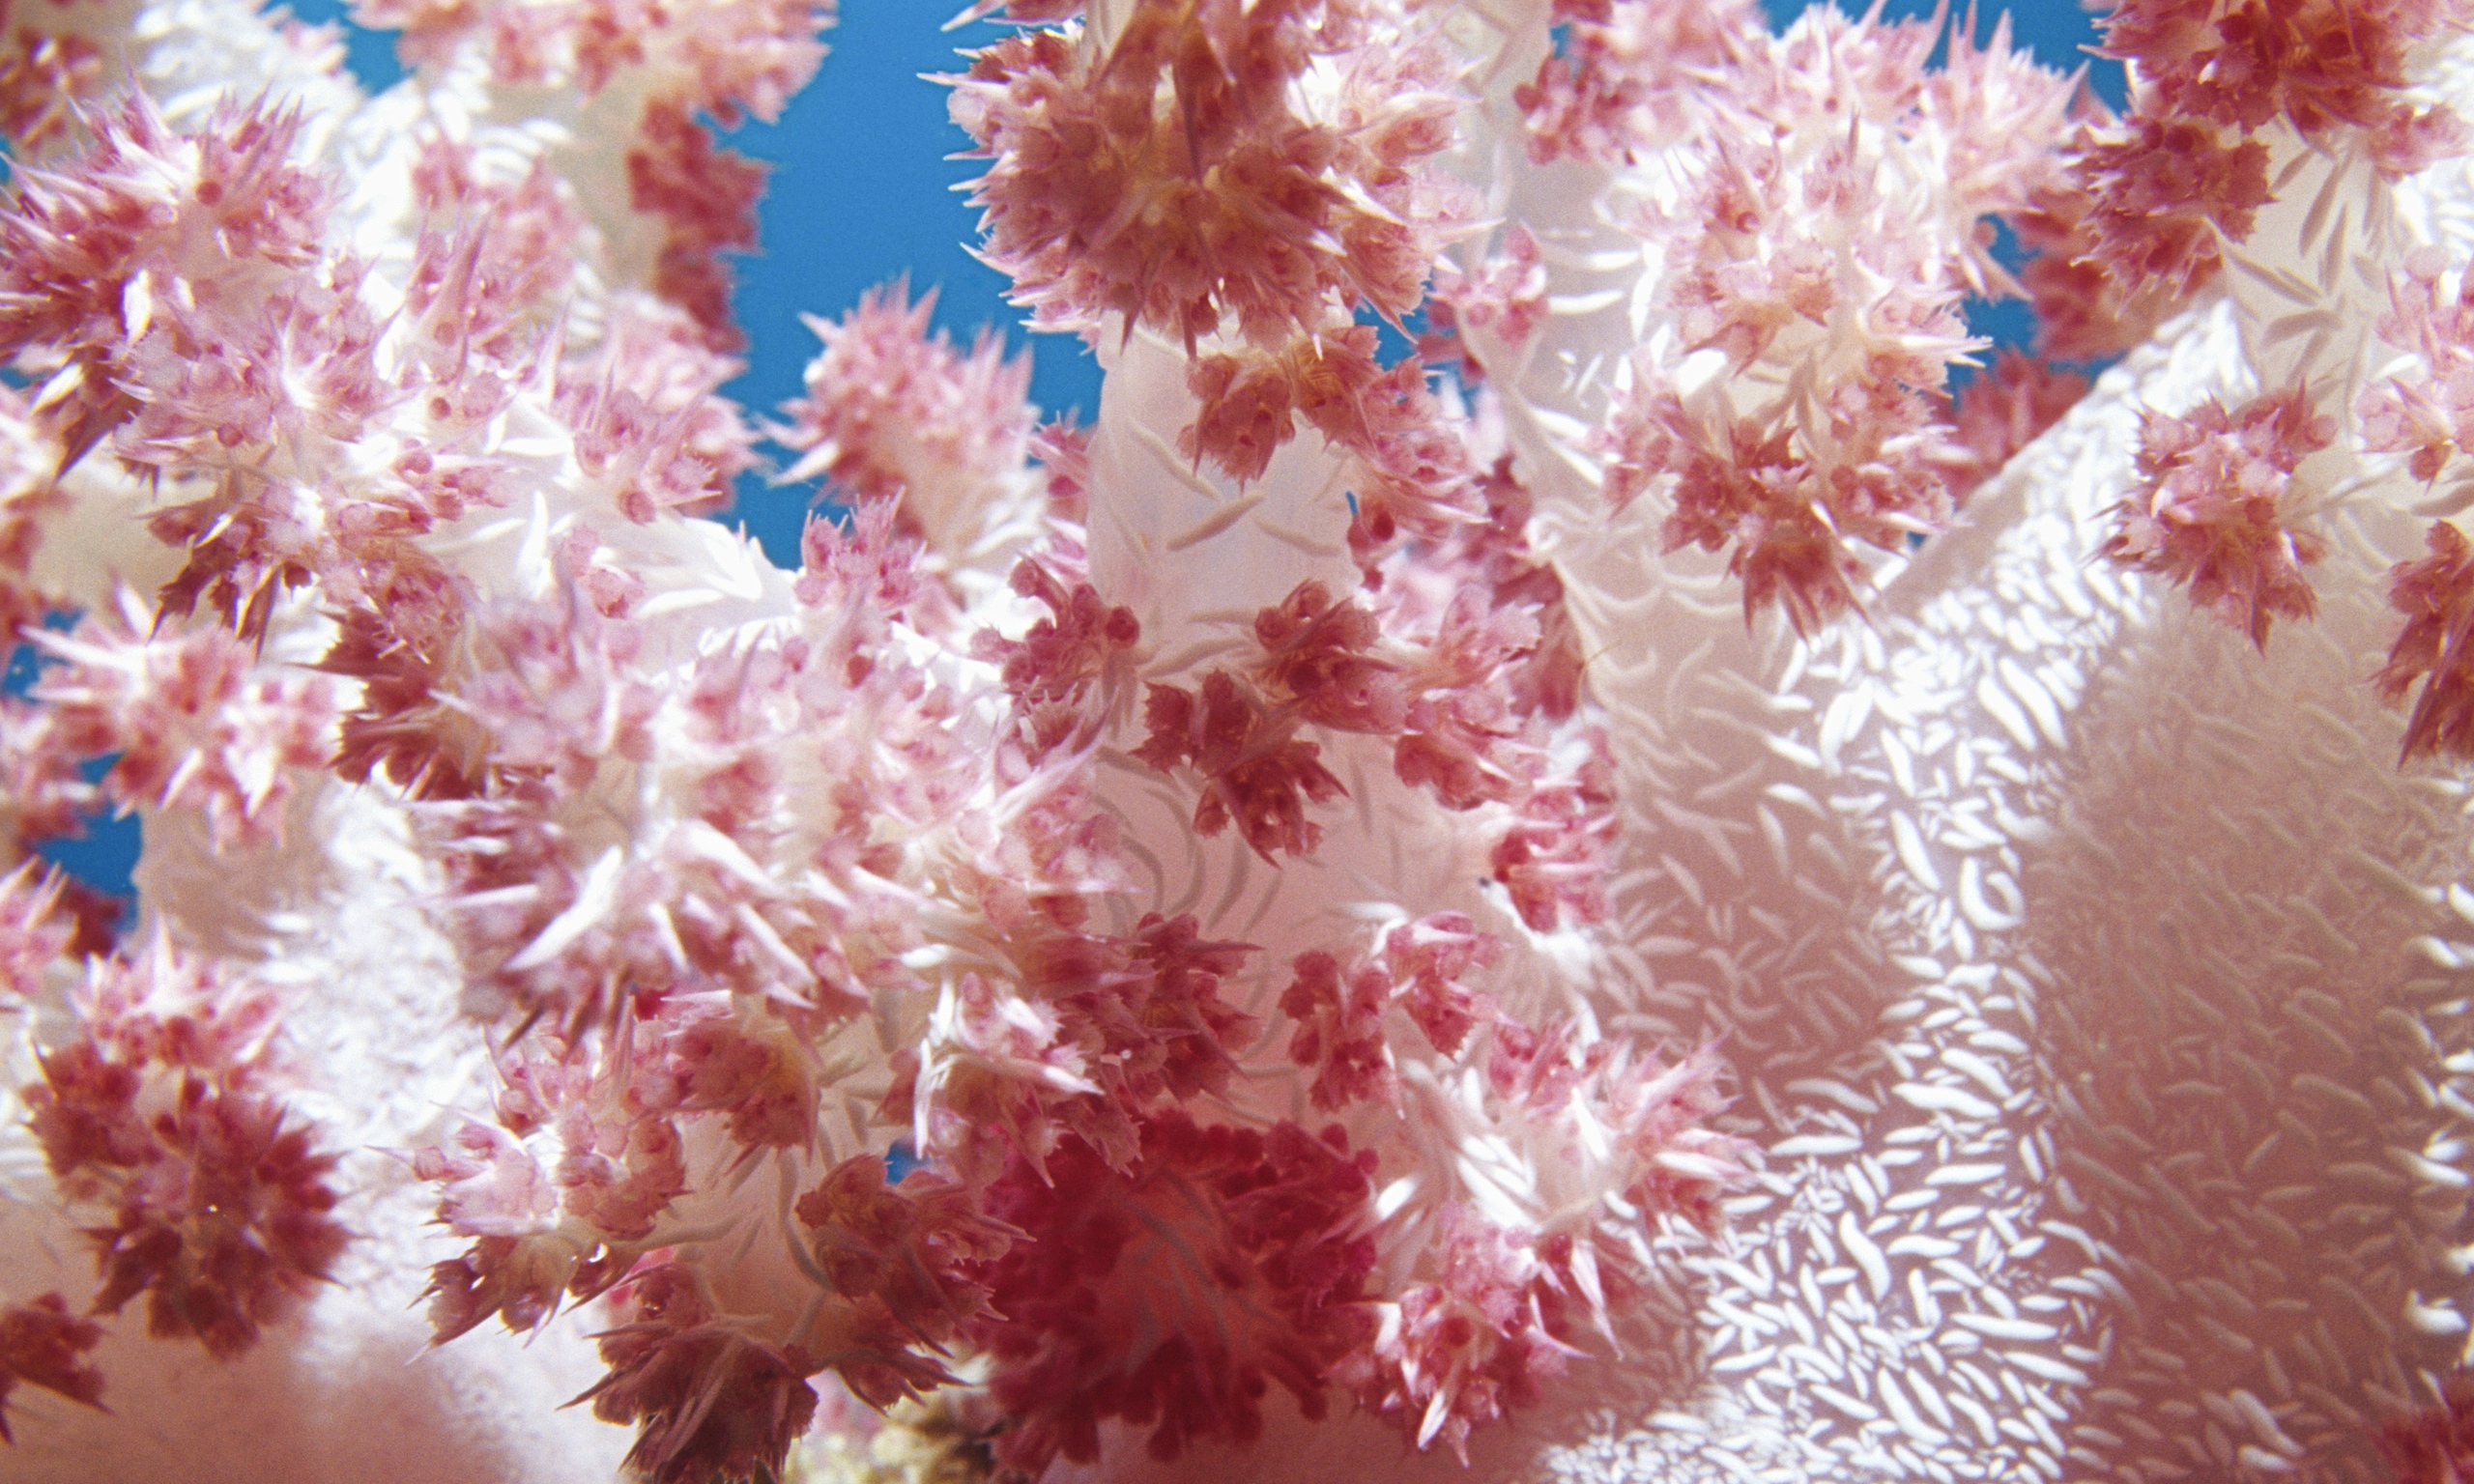 Coral Closeup Flowers HD Wallpaper Pink Soft Coral Closeup Flowers